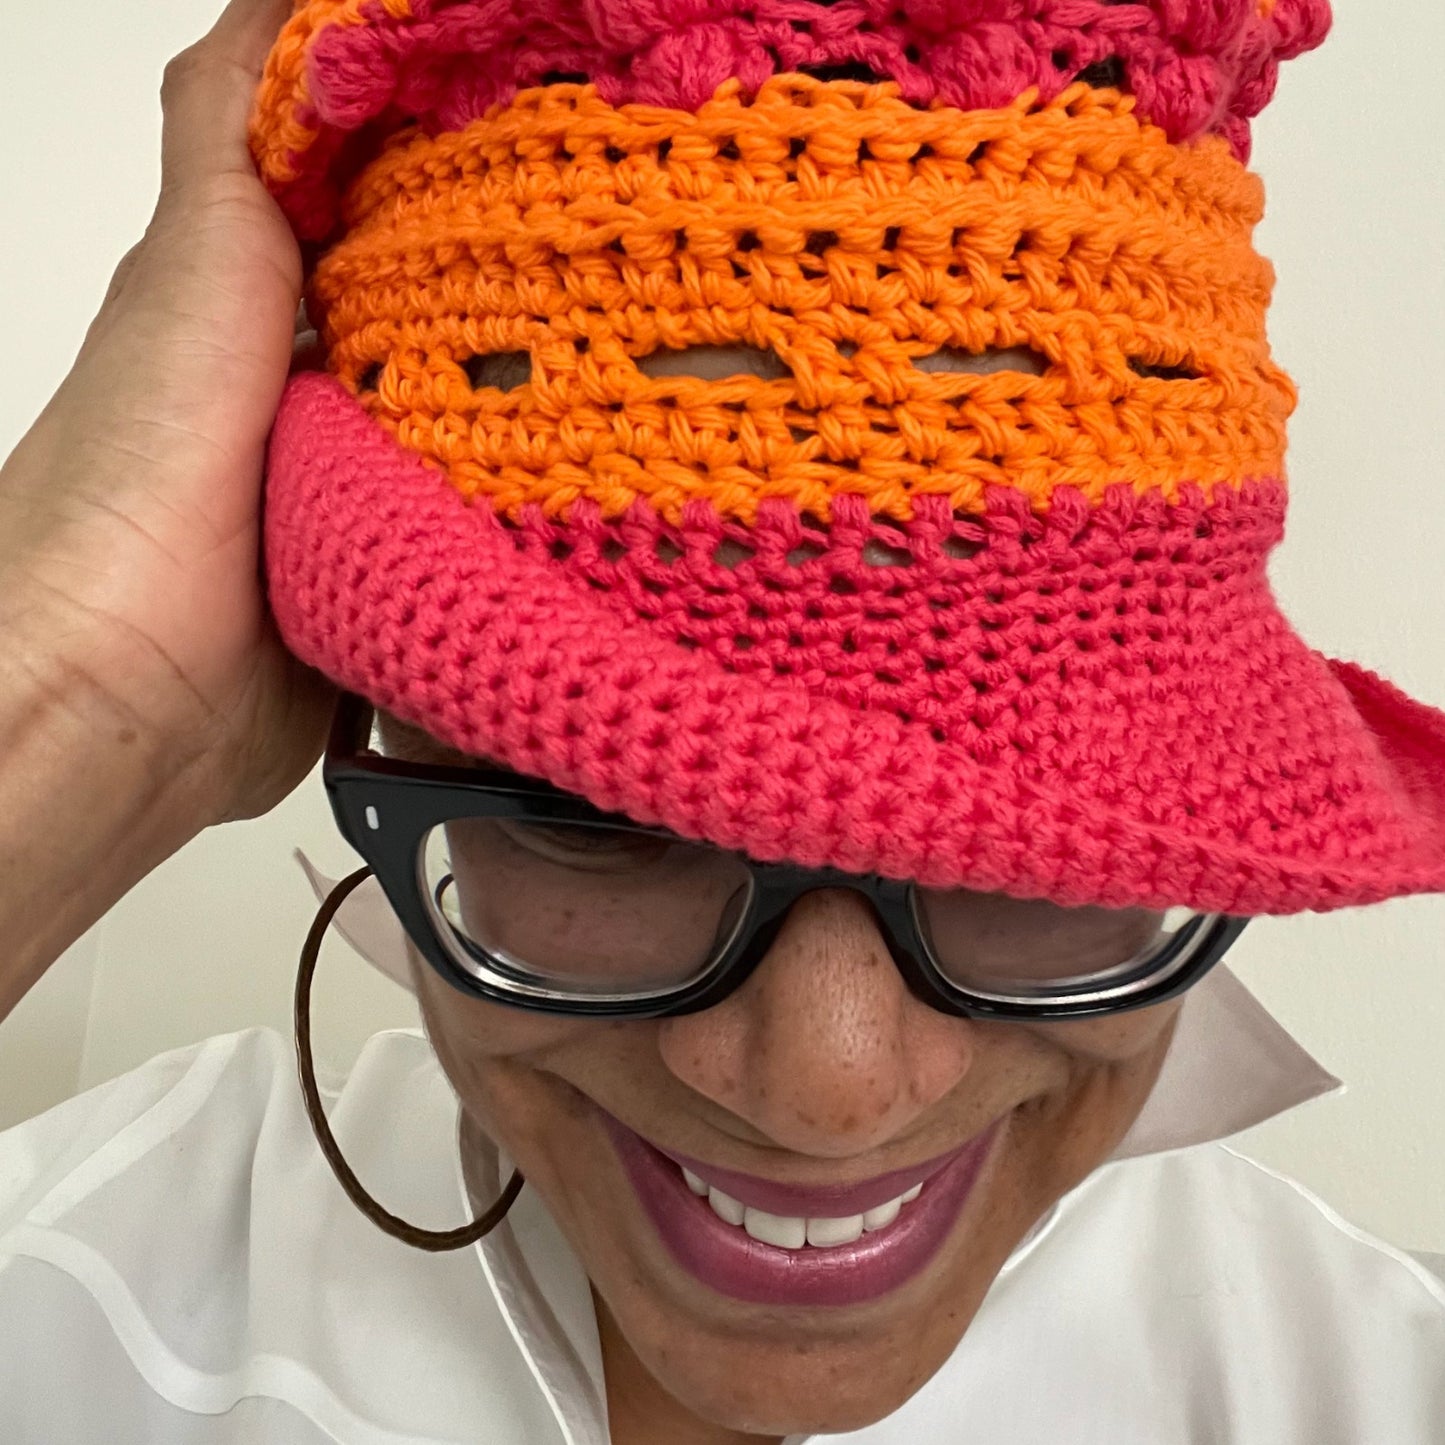 Yarn Gone Wild -Yarn Craft Crochet Hat From The All The Feels Spring Collection